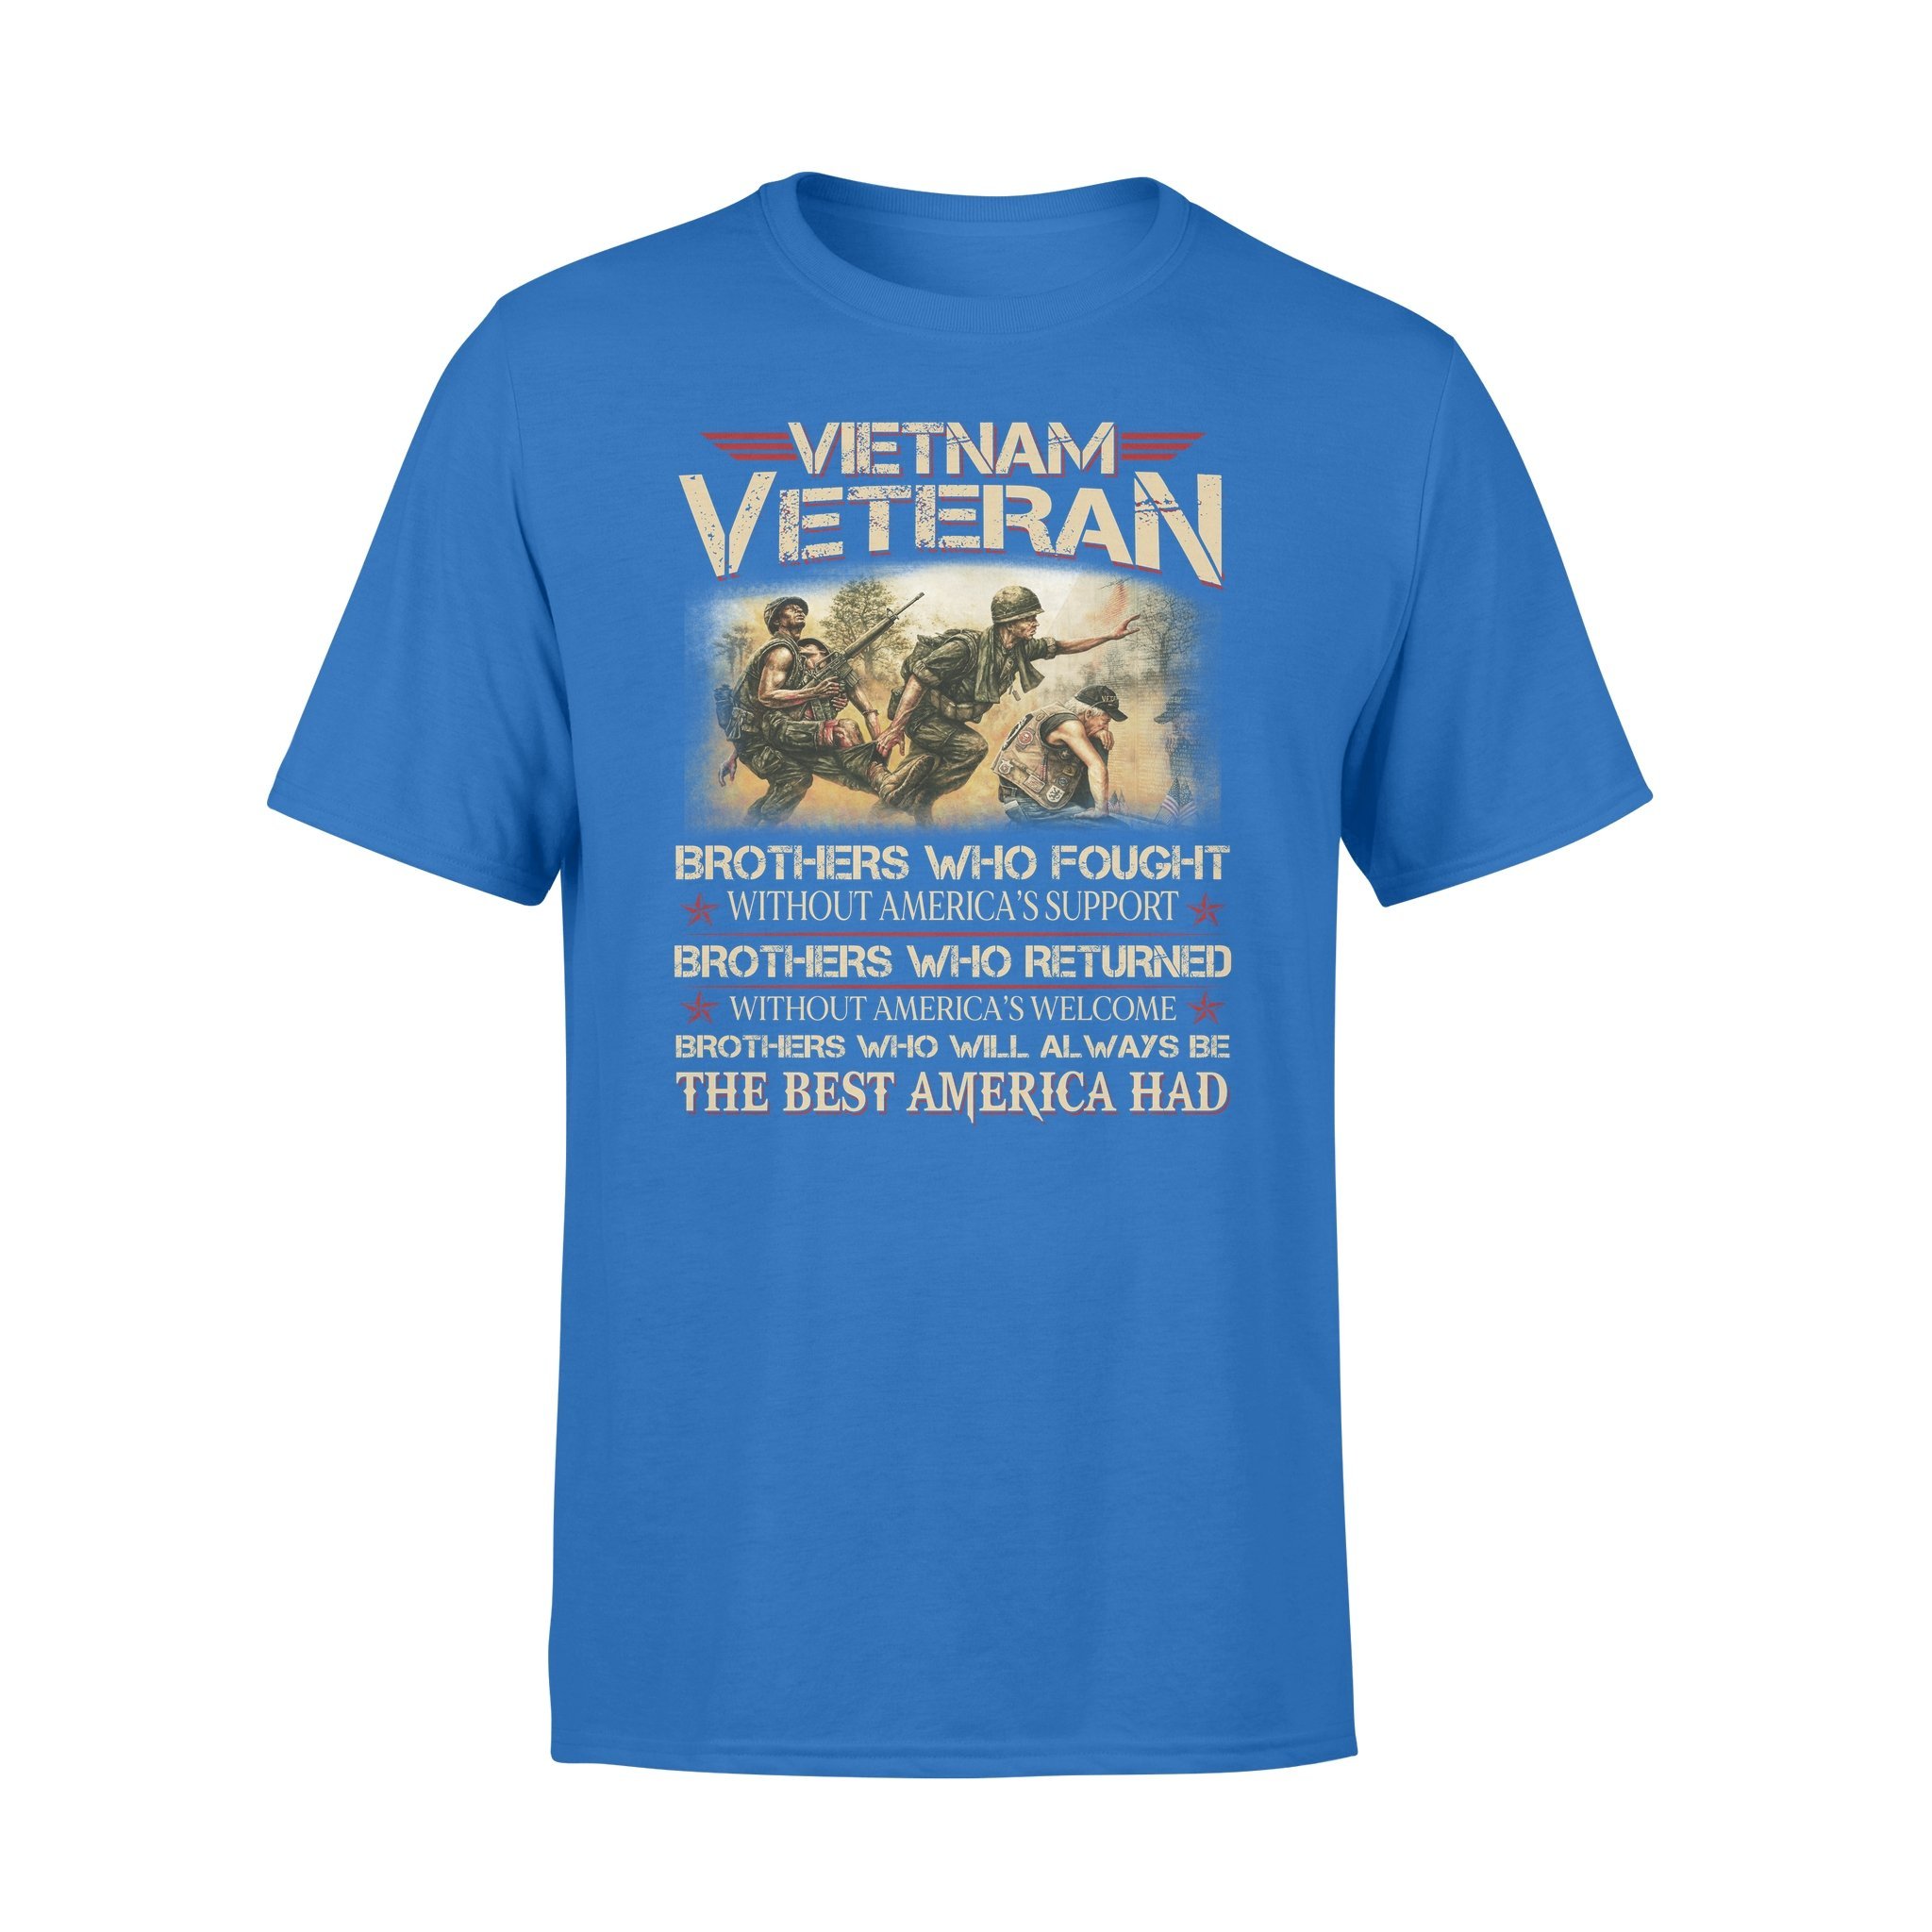 Vietnam Veteran Brothers Who Fought Without America’s Support shirt ...